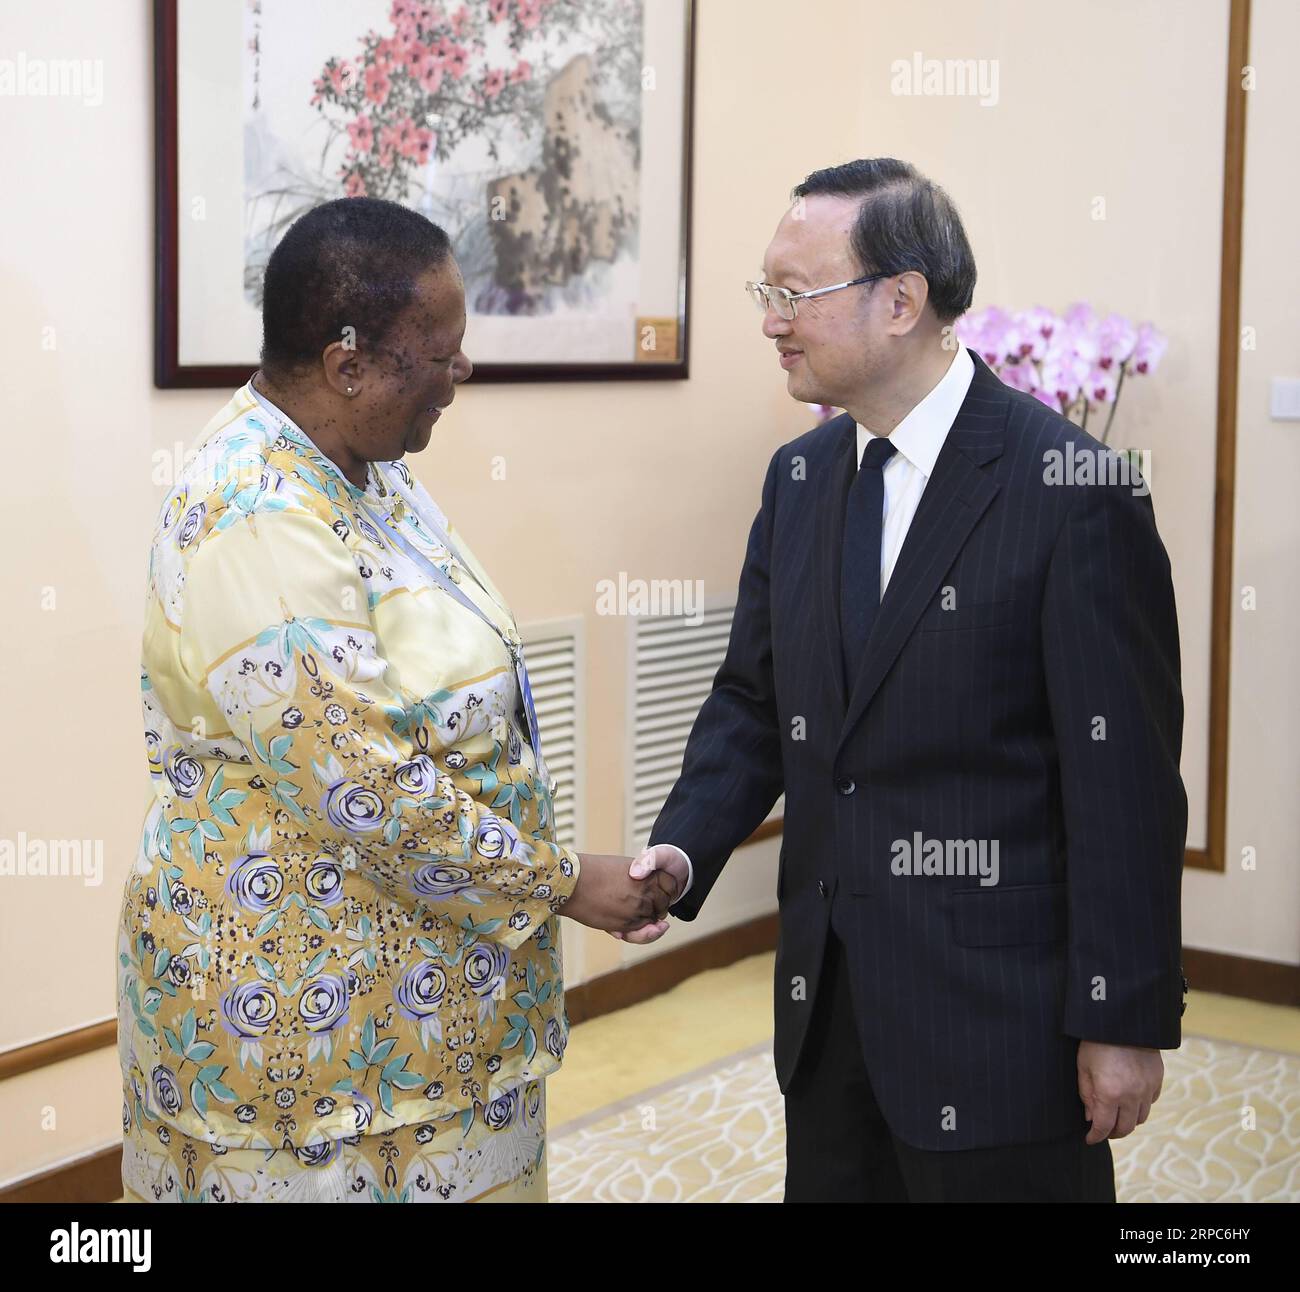 (190625) -- BEIJING, June 25, 2019 -- Yang Jiechi, a member of the Political Bureau of the Central Committee of the Communist Party of China (CPC) and director of the Office of the Foreign Affairs Commission of the CPC Central Committee, meets with South African Foreign Minister Naledi Pandor in Beijing, capital of China, June 25, 2019. ) CHINA-BEIJING-YANG JIECHI-SOUTH AFRICAN FM-MEETING (CN) ZhangxLing PUBLICATIONxNOTxINxCHN Stock Photo